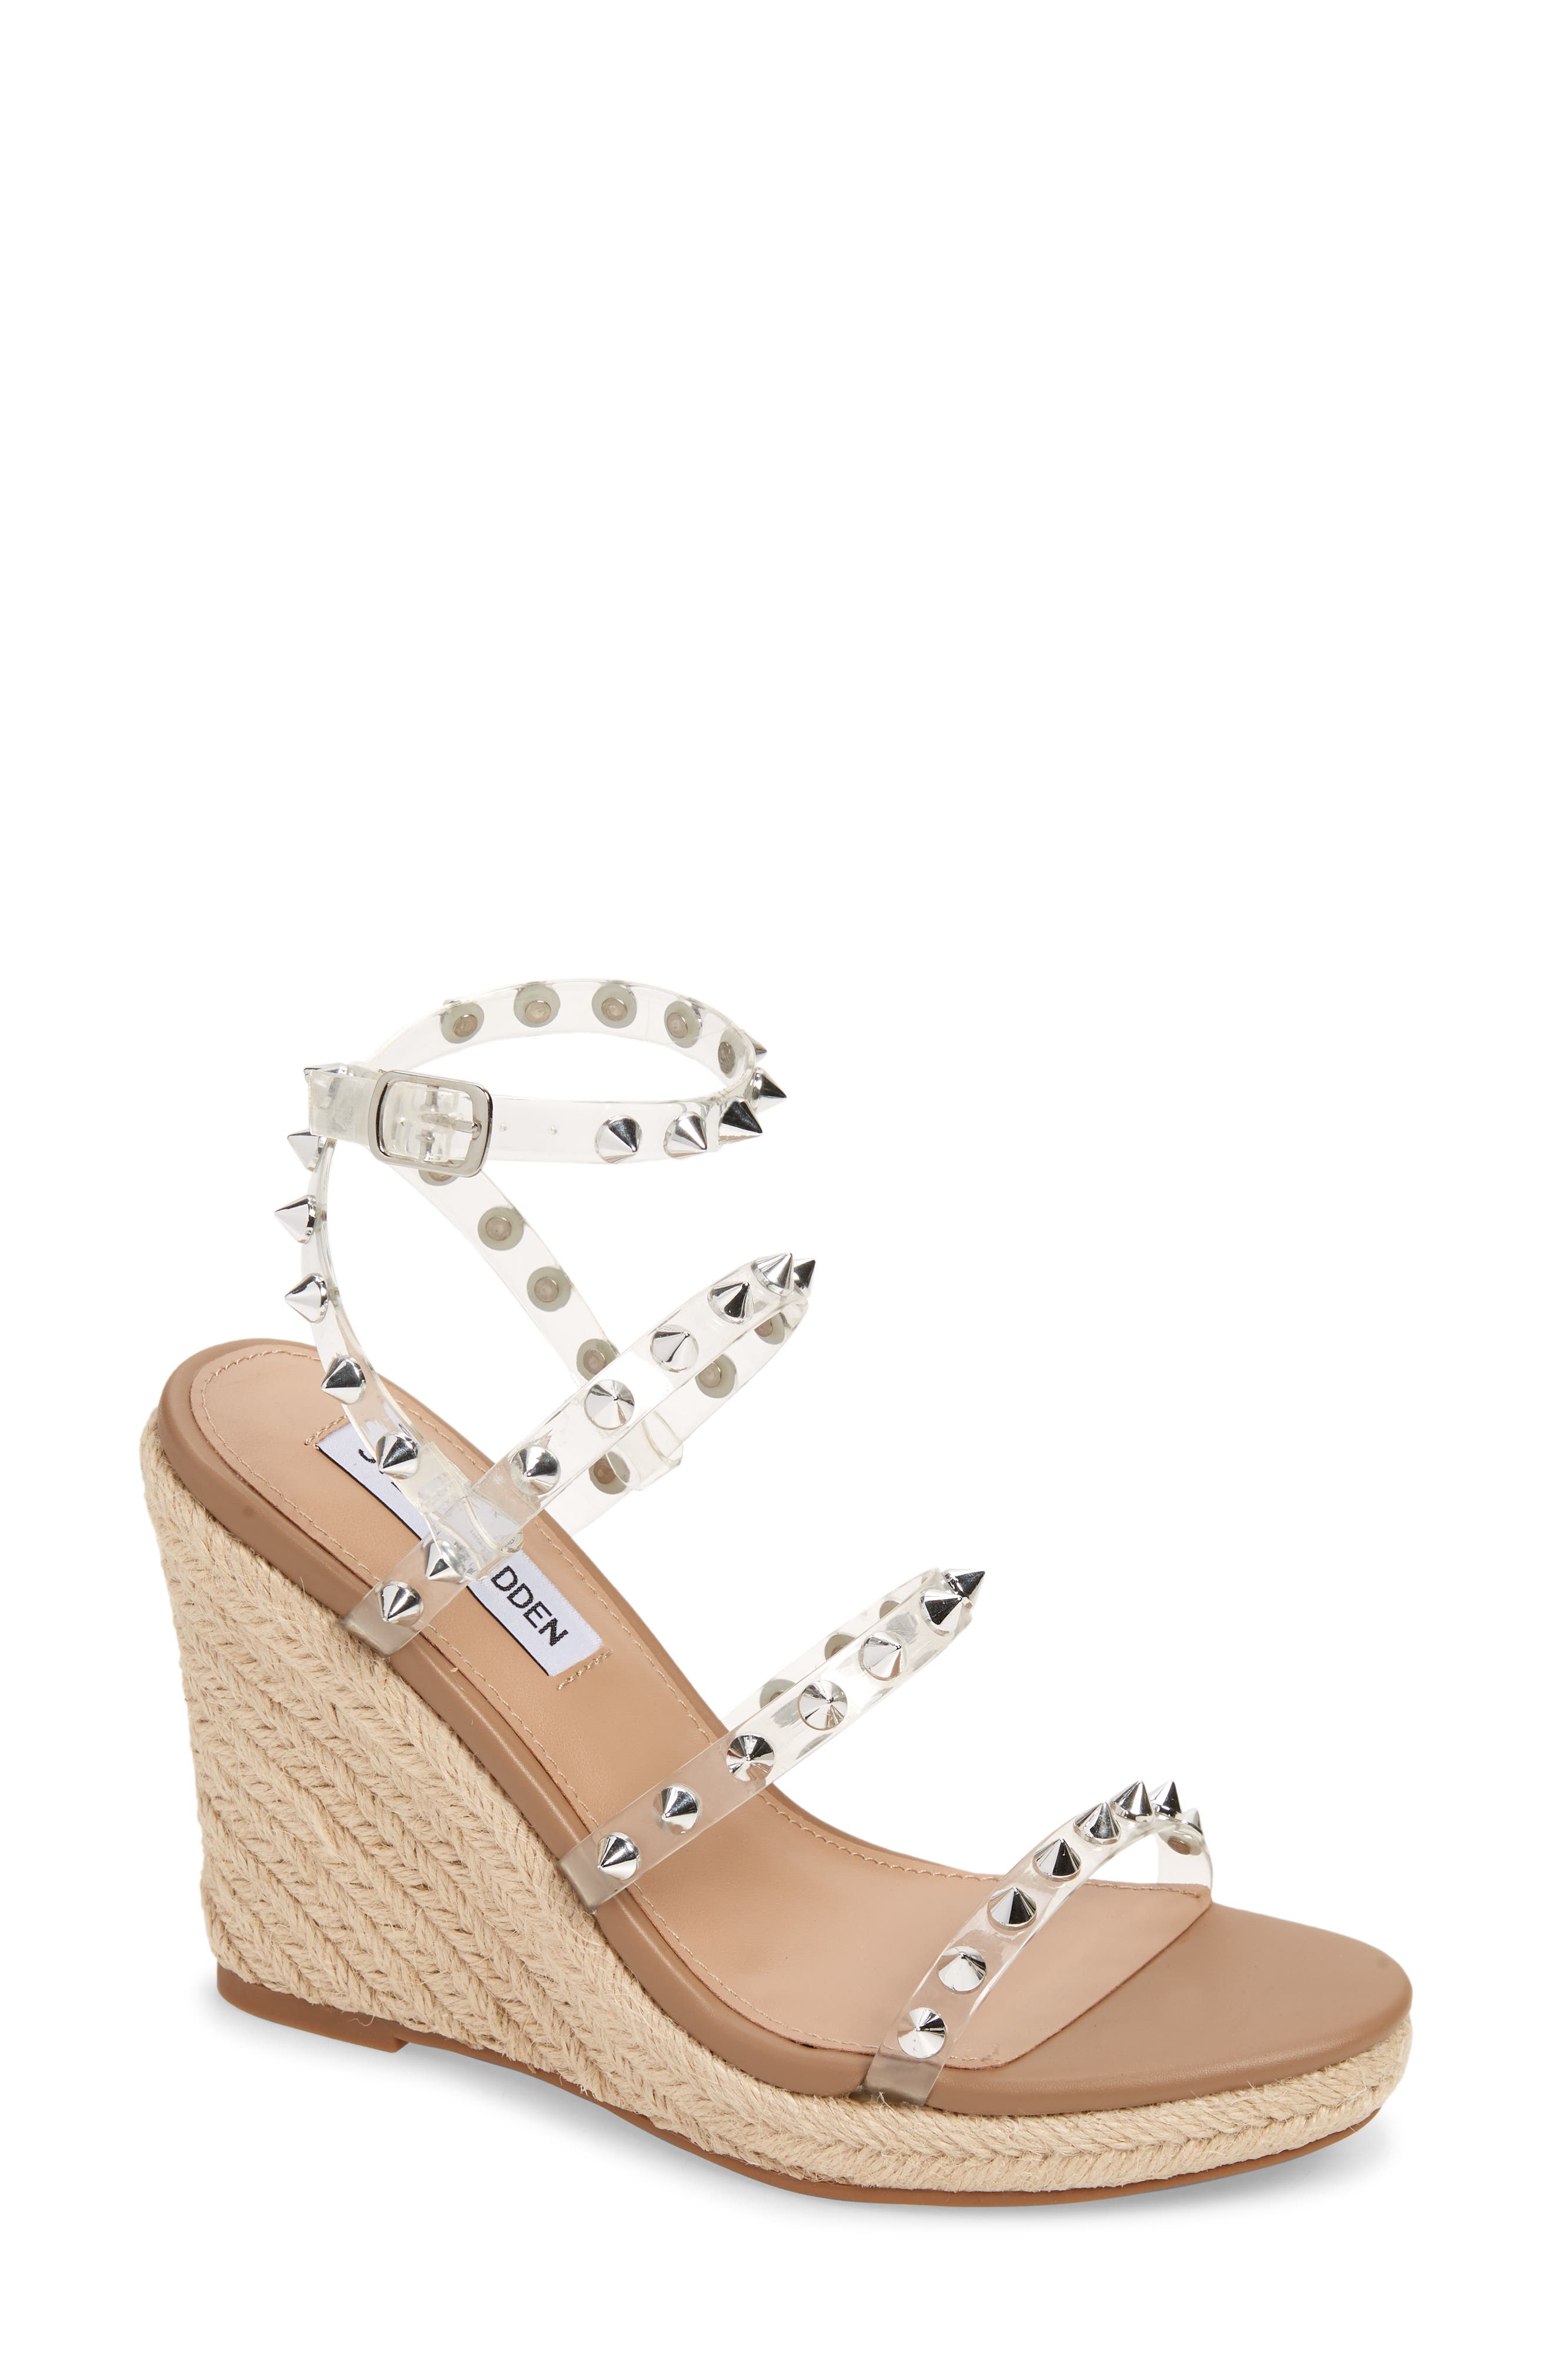 wedges trend 219